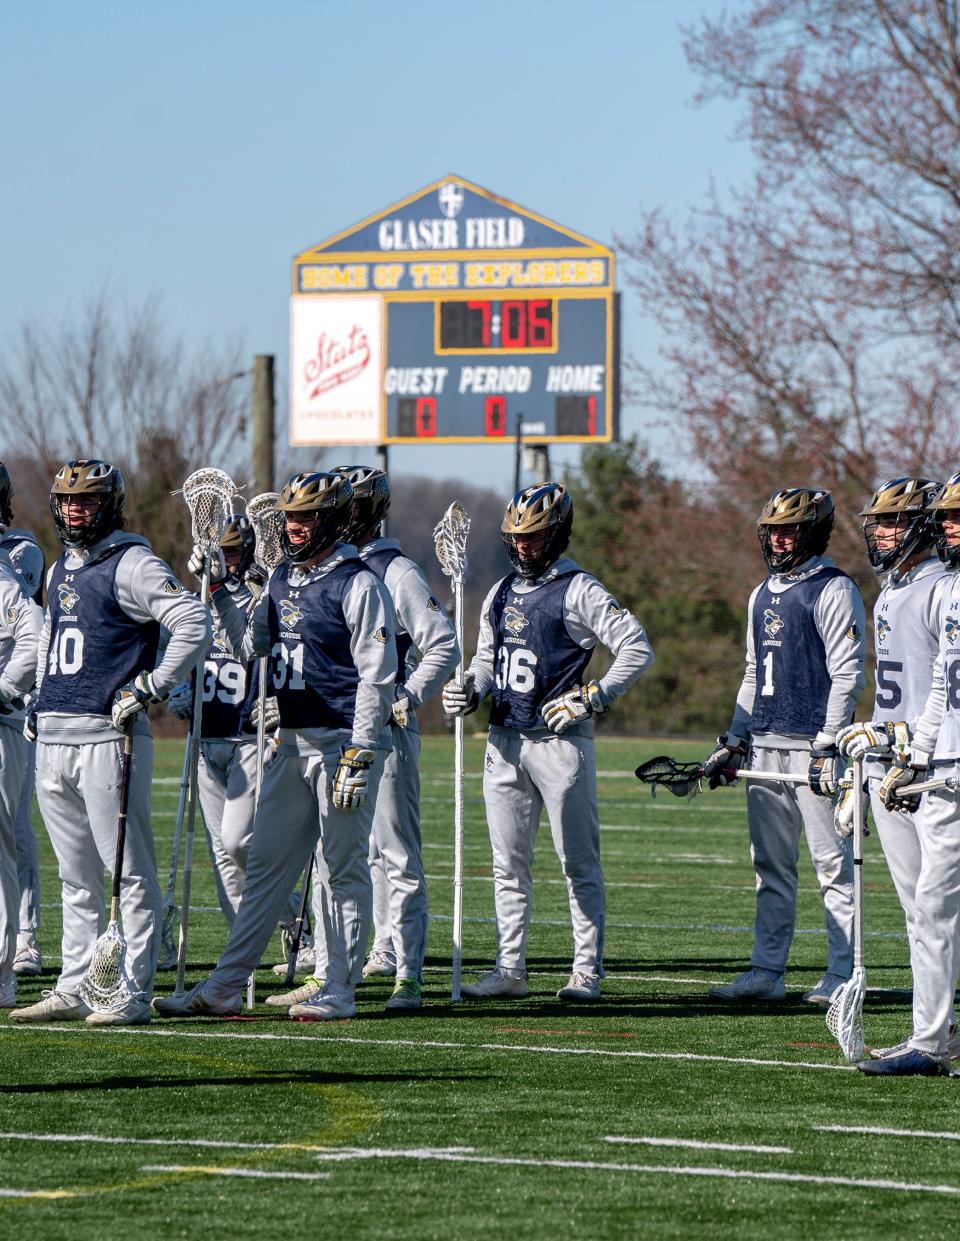 La Salle High's lacrosse team is undefeated and loaded with senior standouts.